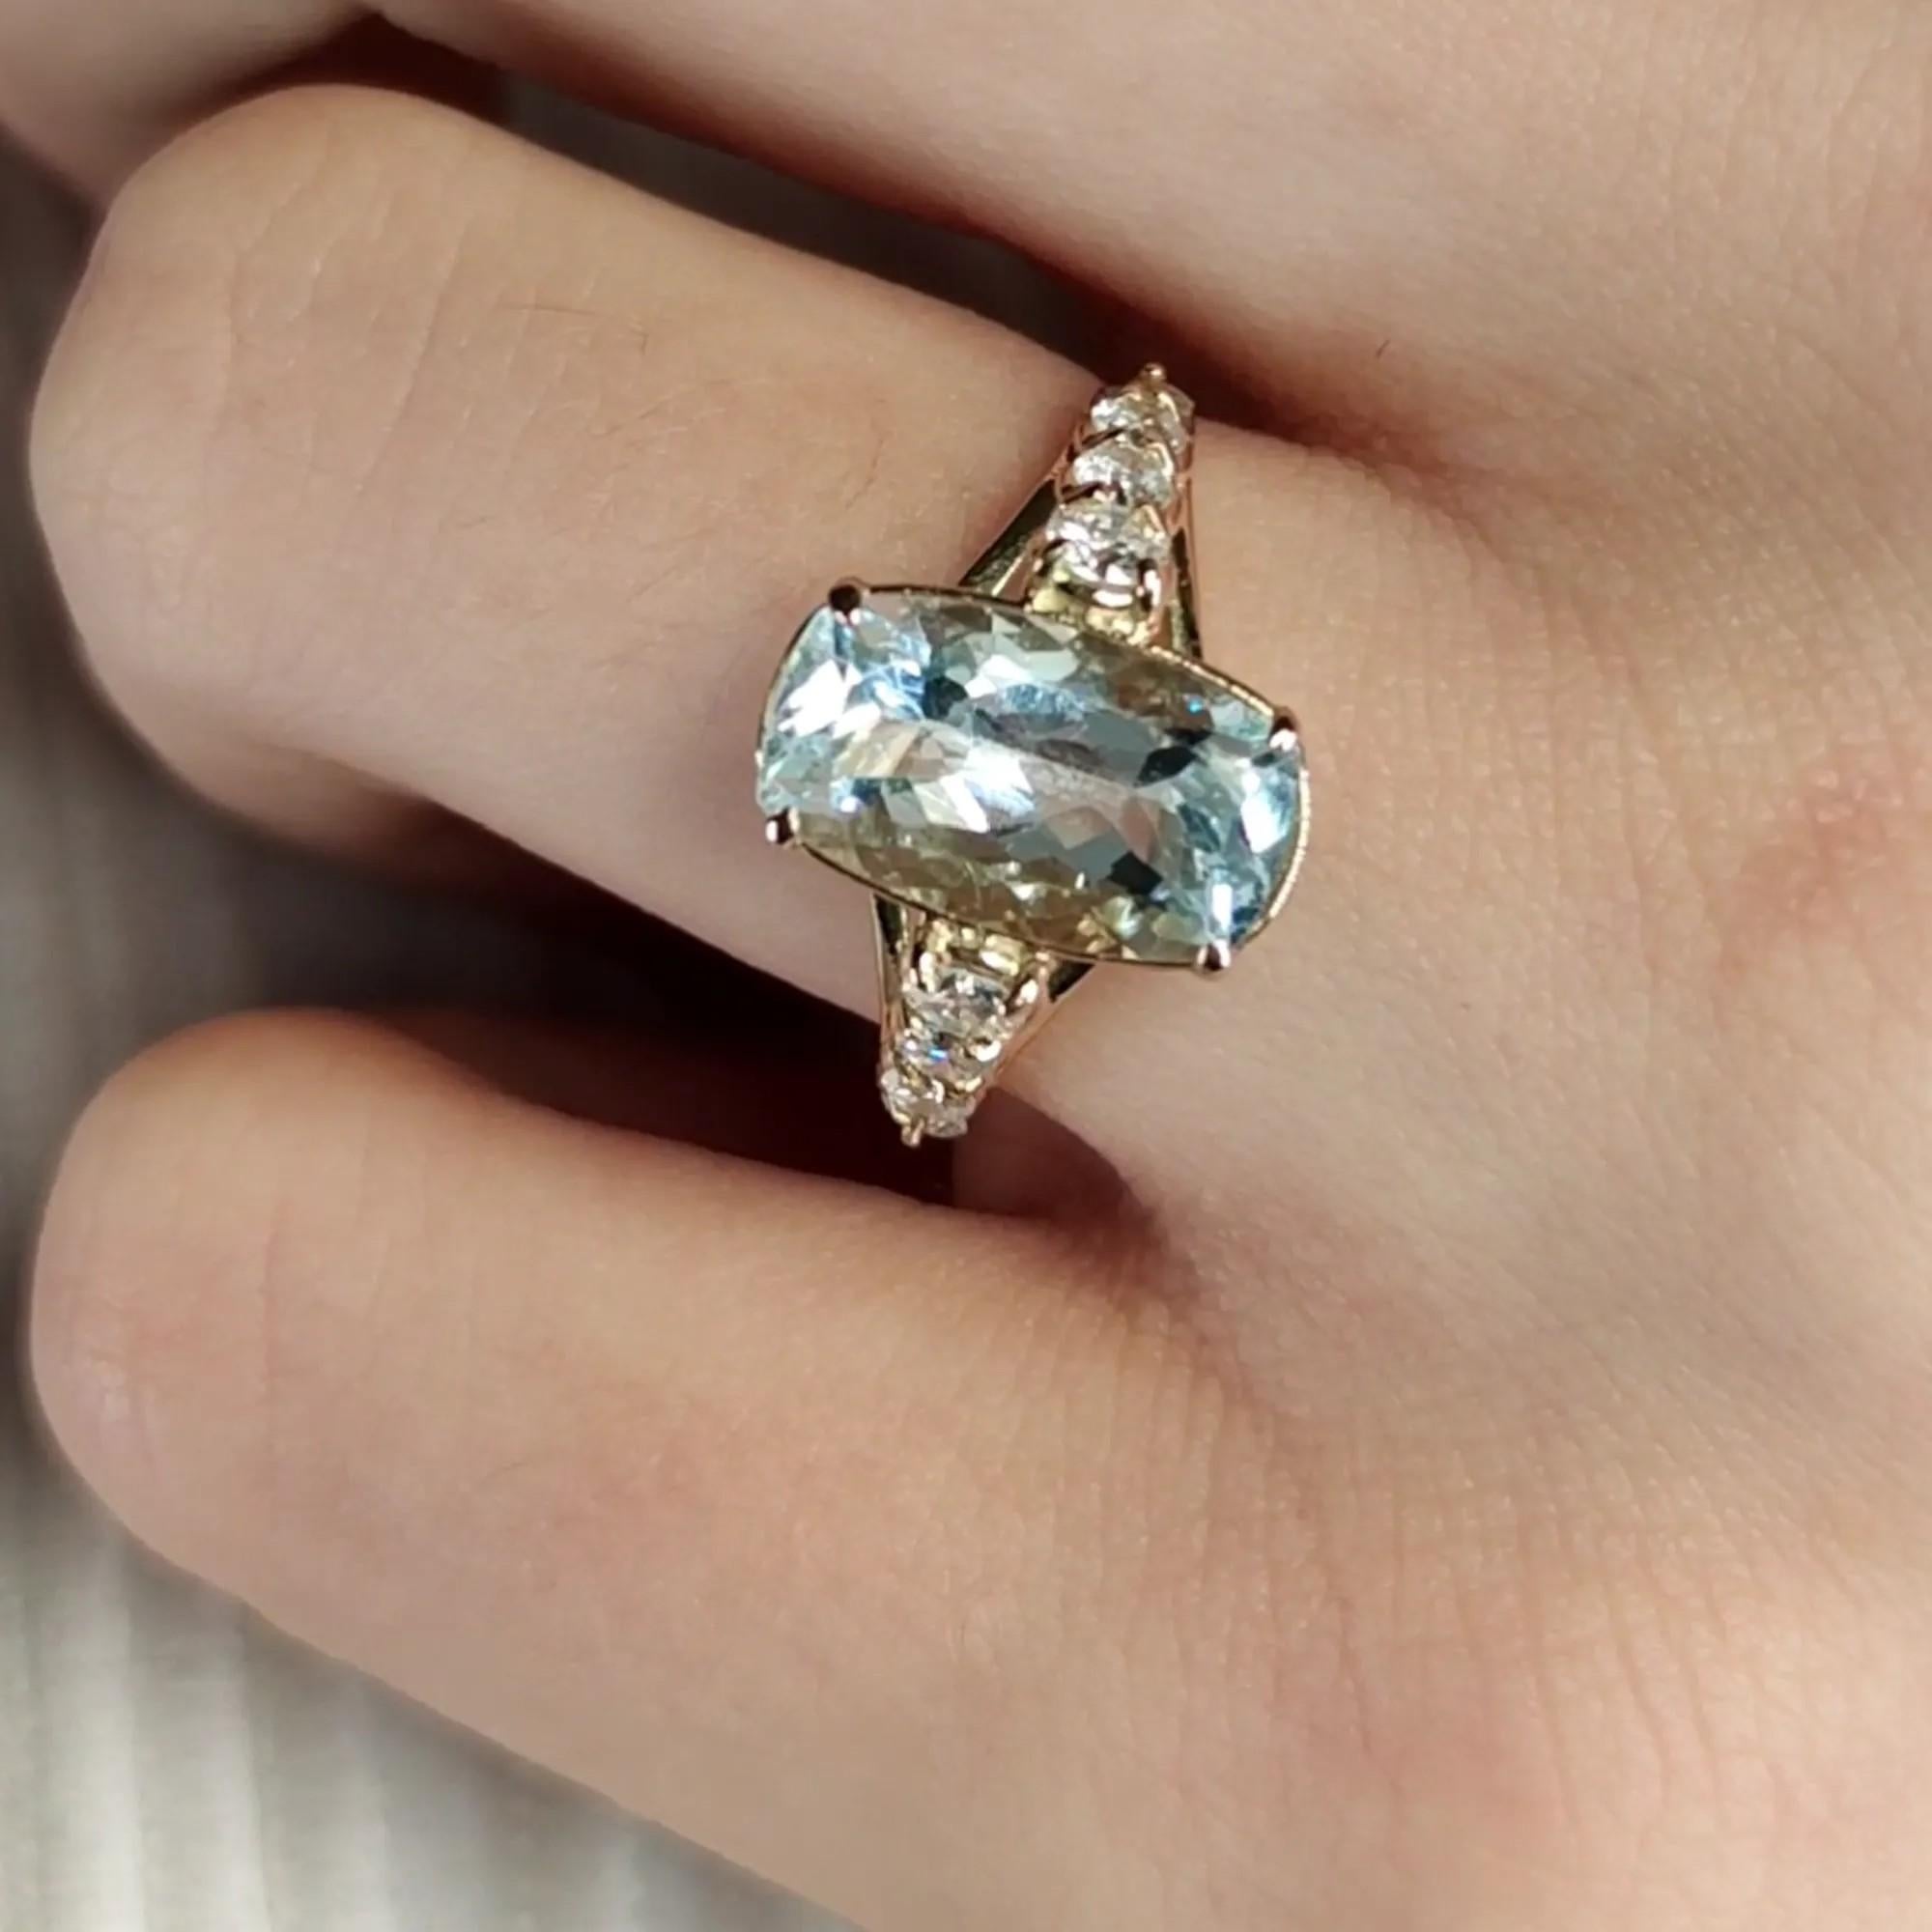 Elevate your style with our exquisite 3 Carat Aquamarine and 0.50 Carat Diamond 14K Yellow Gold Engagement Ring. Meticulously handcrafted, this unique women's ring features a central aquamarine enhanced by four tapered diamonds on each side. With a